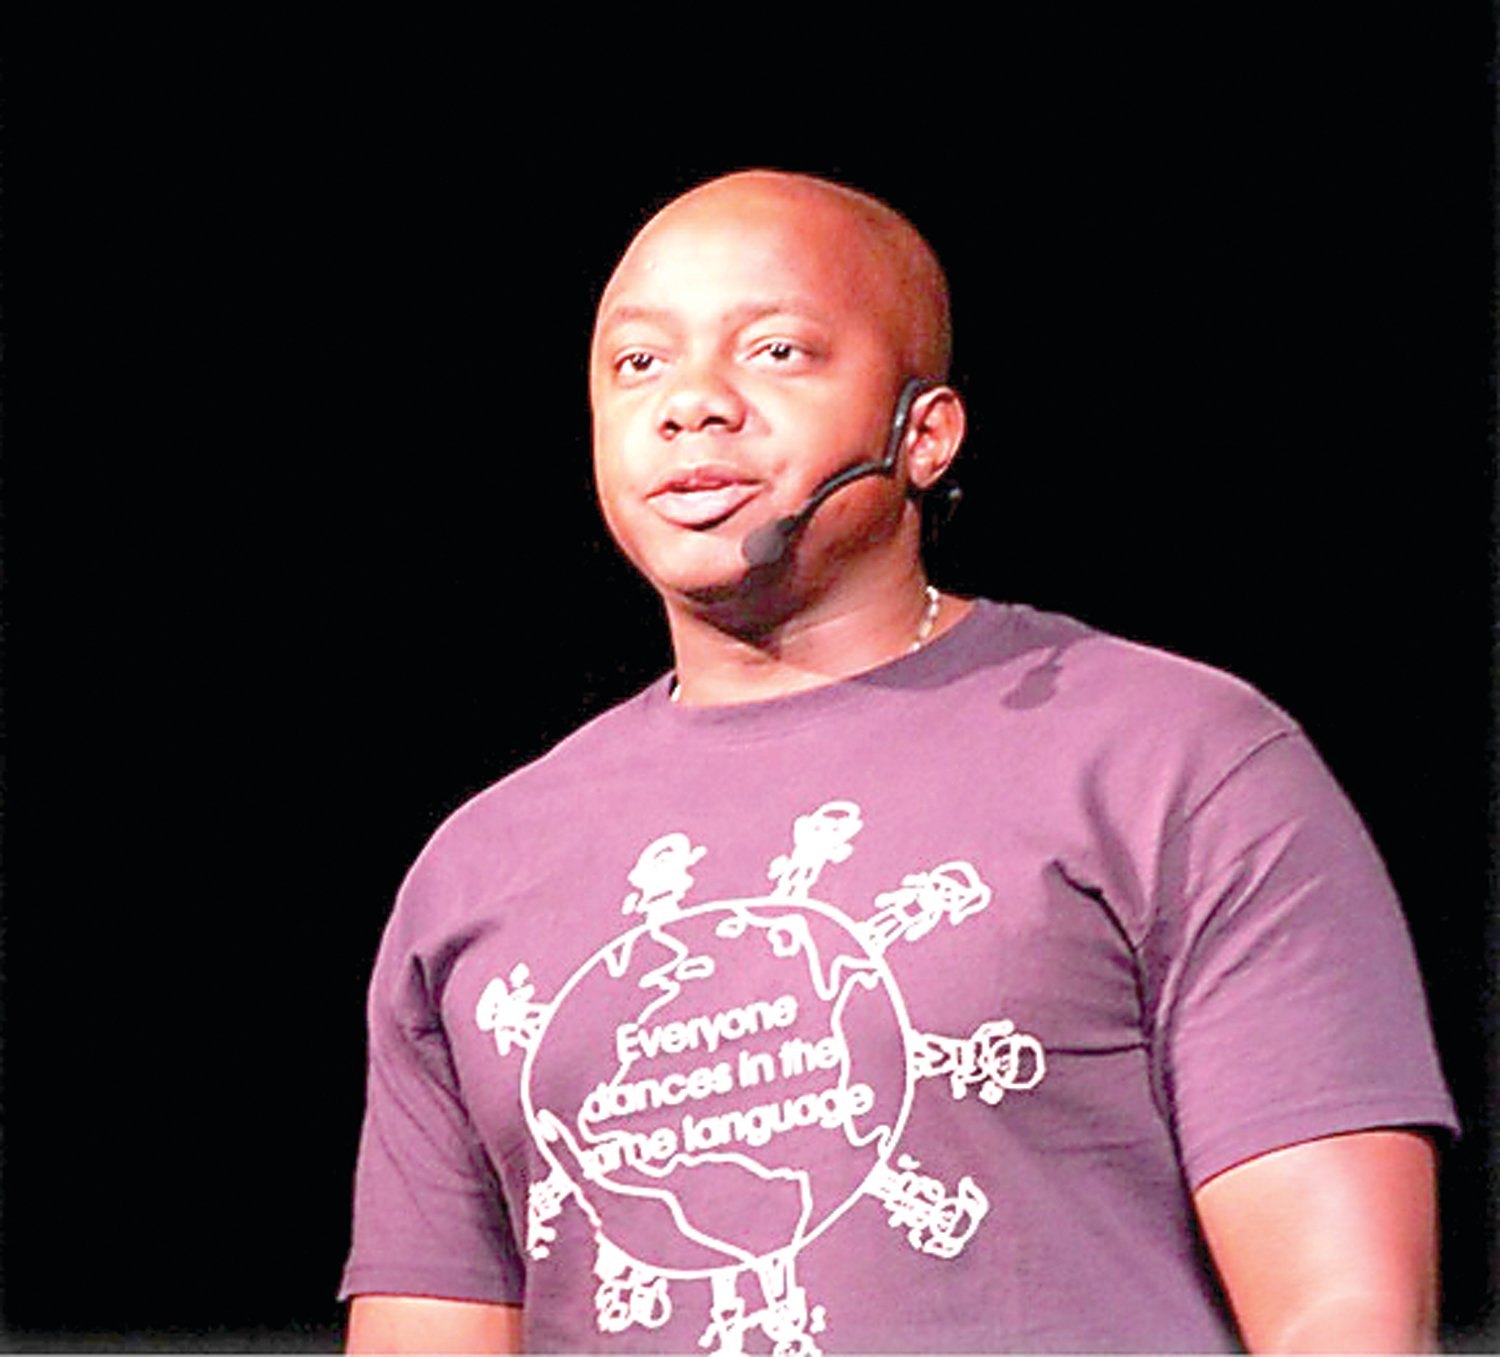 Speaking from personal experience and at times through other characters, Dr. Mykee Fowlin, an actor, psychologist and son of African immigrants, uses anecdotes and dark humor to address intolerance and champion self-acceptance.